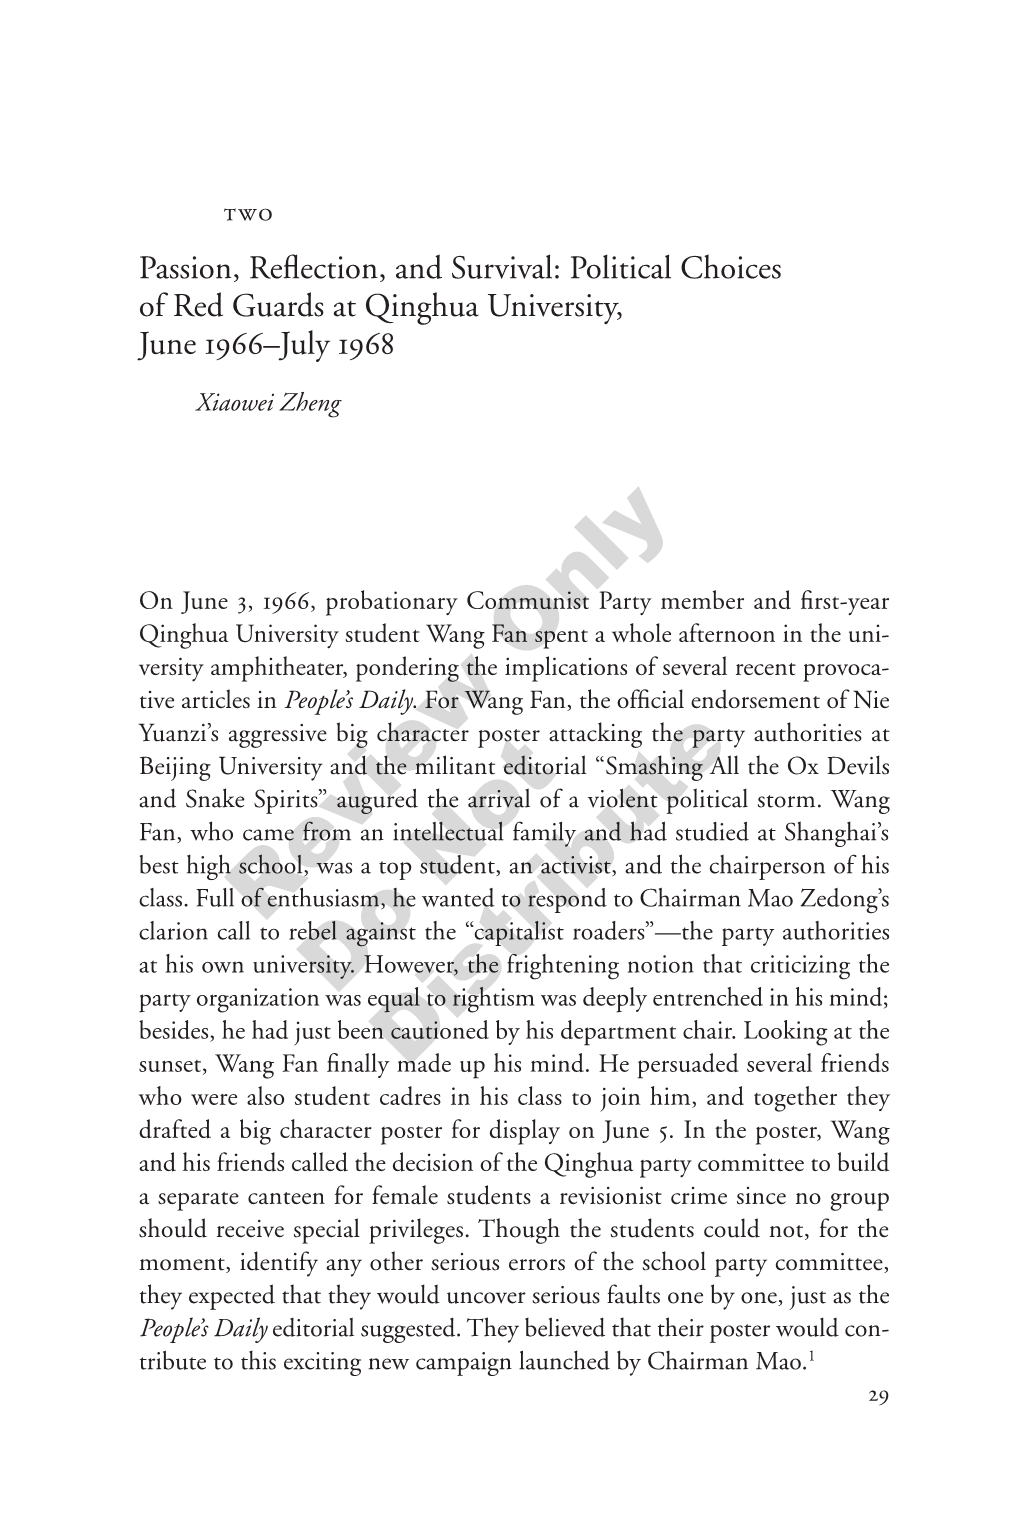 Political Choices of Red Guards at Qinghua University, June 1966–July 1968